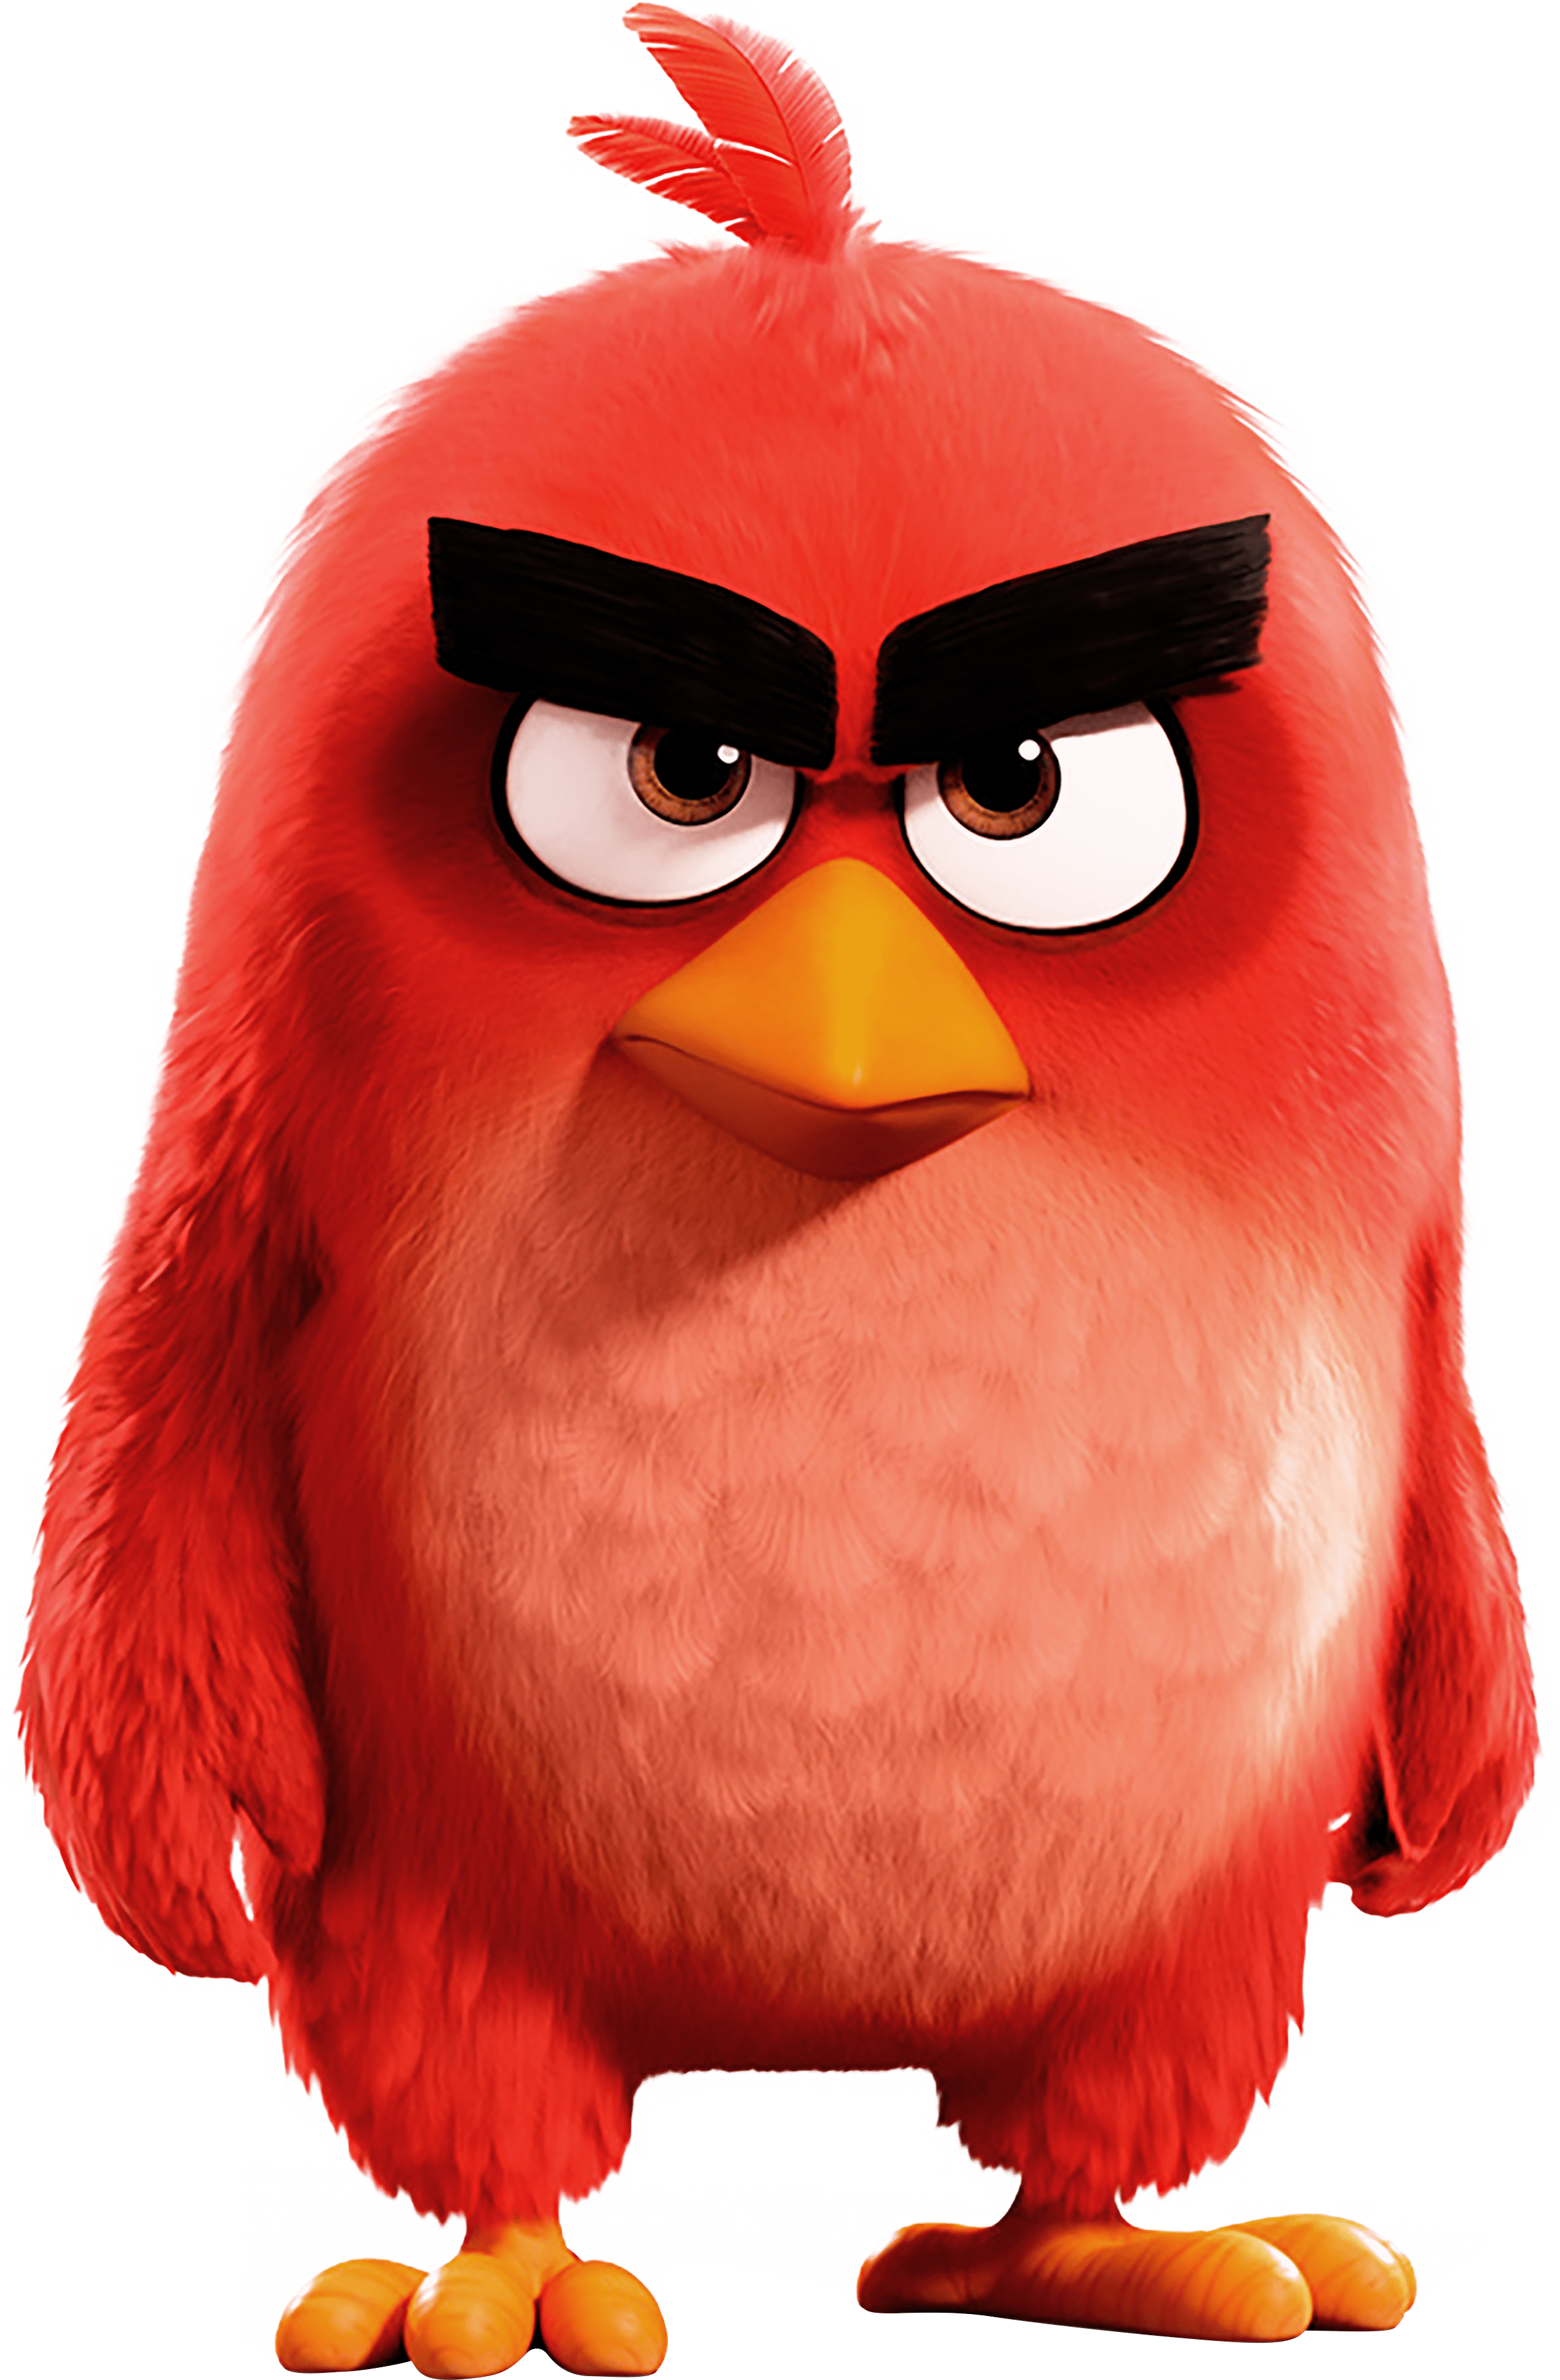 🔥 #the angry birds movie 2 wallpaper - 4k. movies category - android /  iphone hd wallpaper background download HD Photos & Wallpapers (0+ Images)  - Page: 1